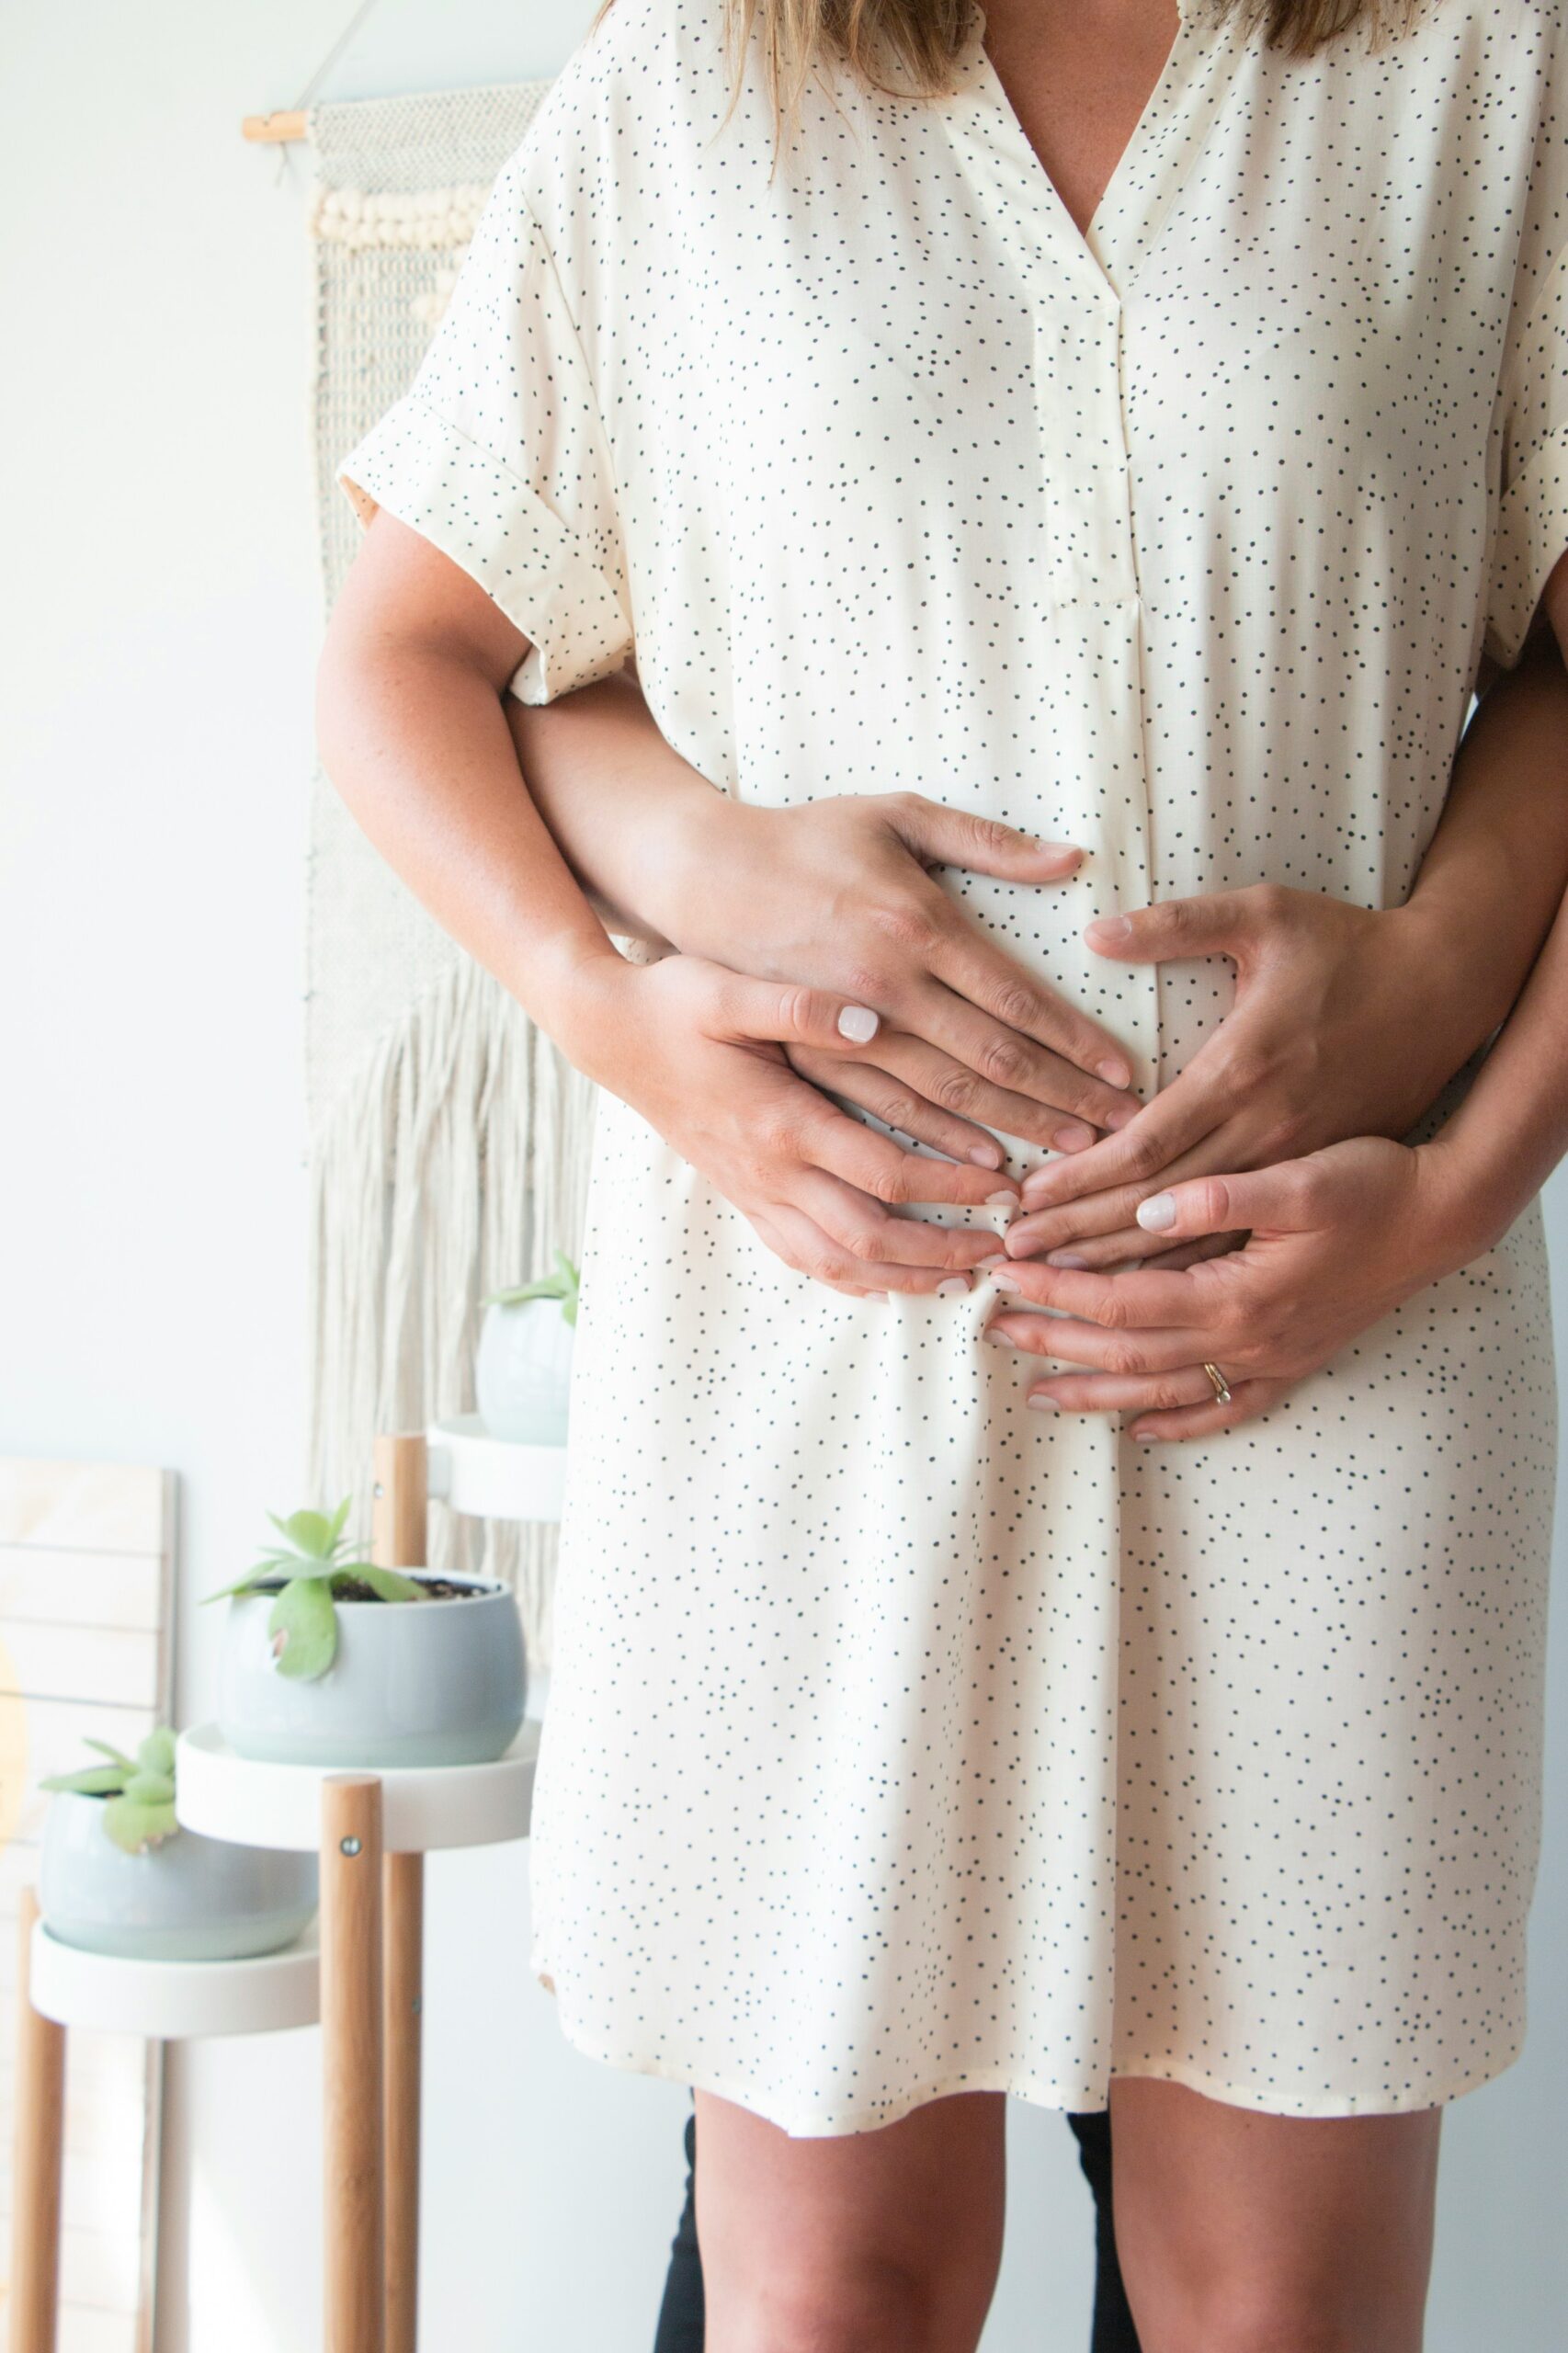 The First Trimester: What to Expect During the Early Weeks of Pregnancy